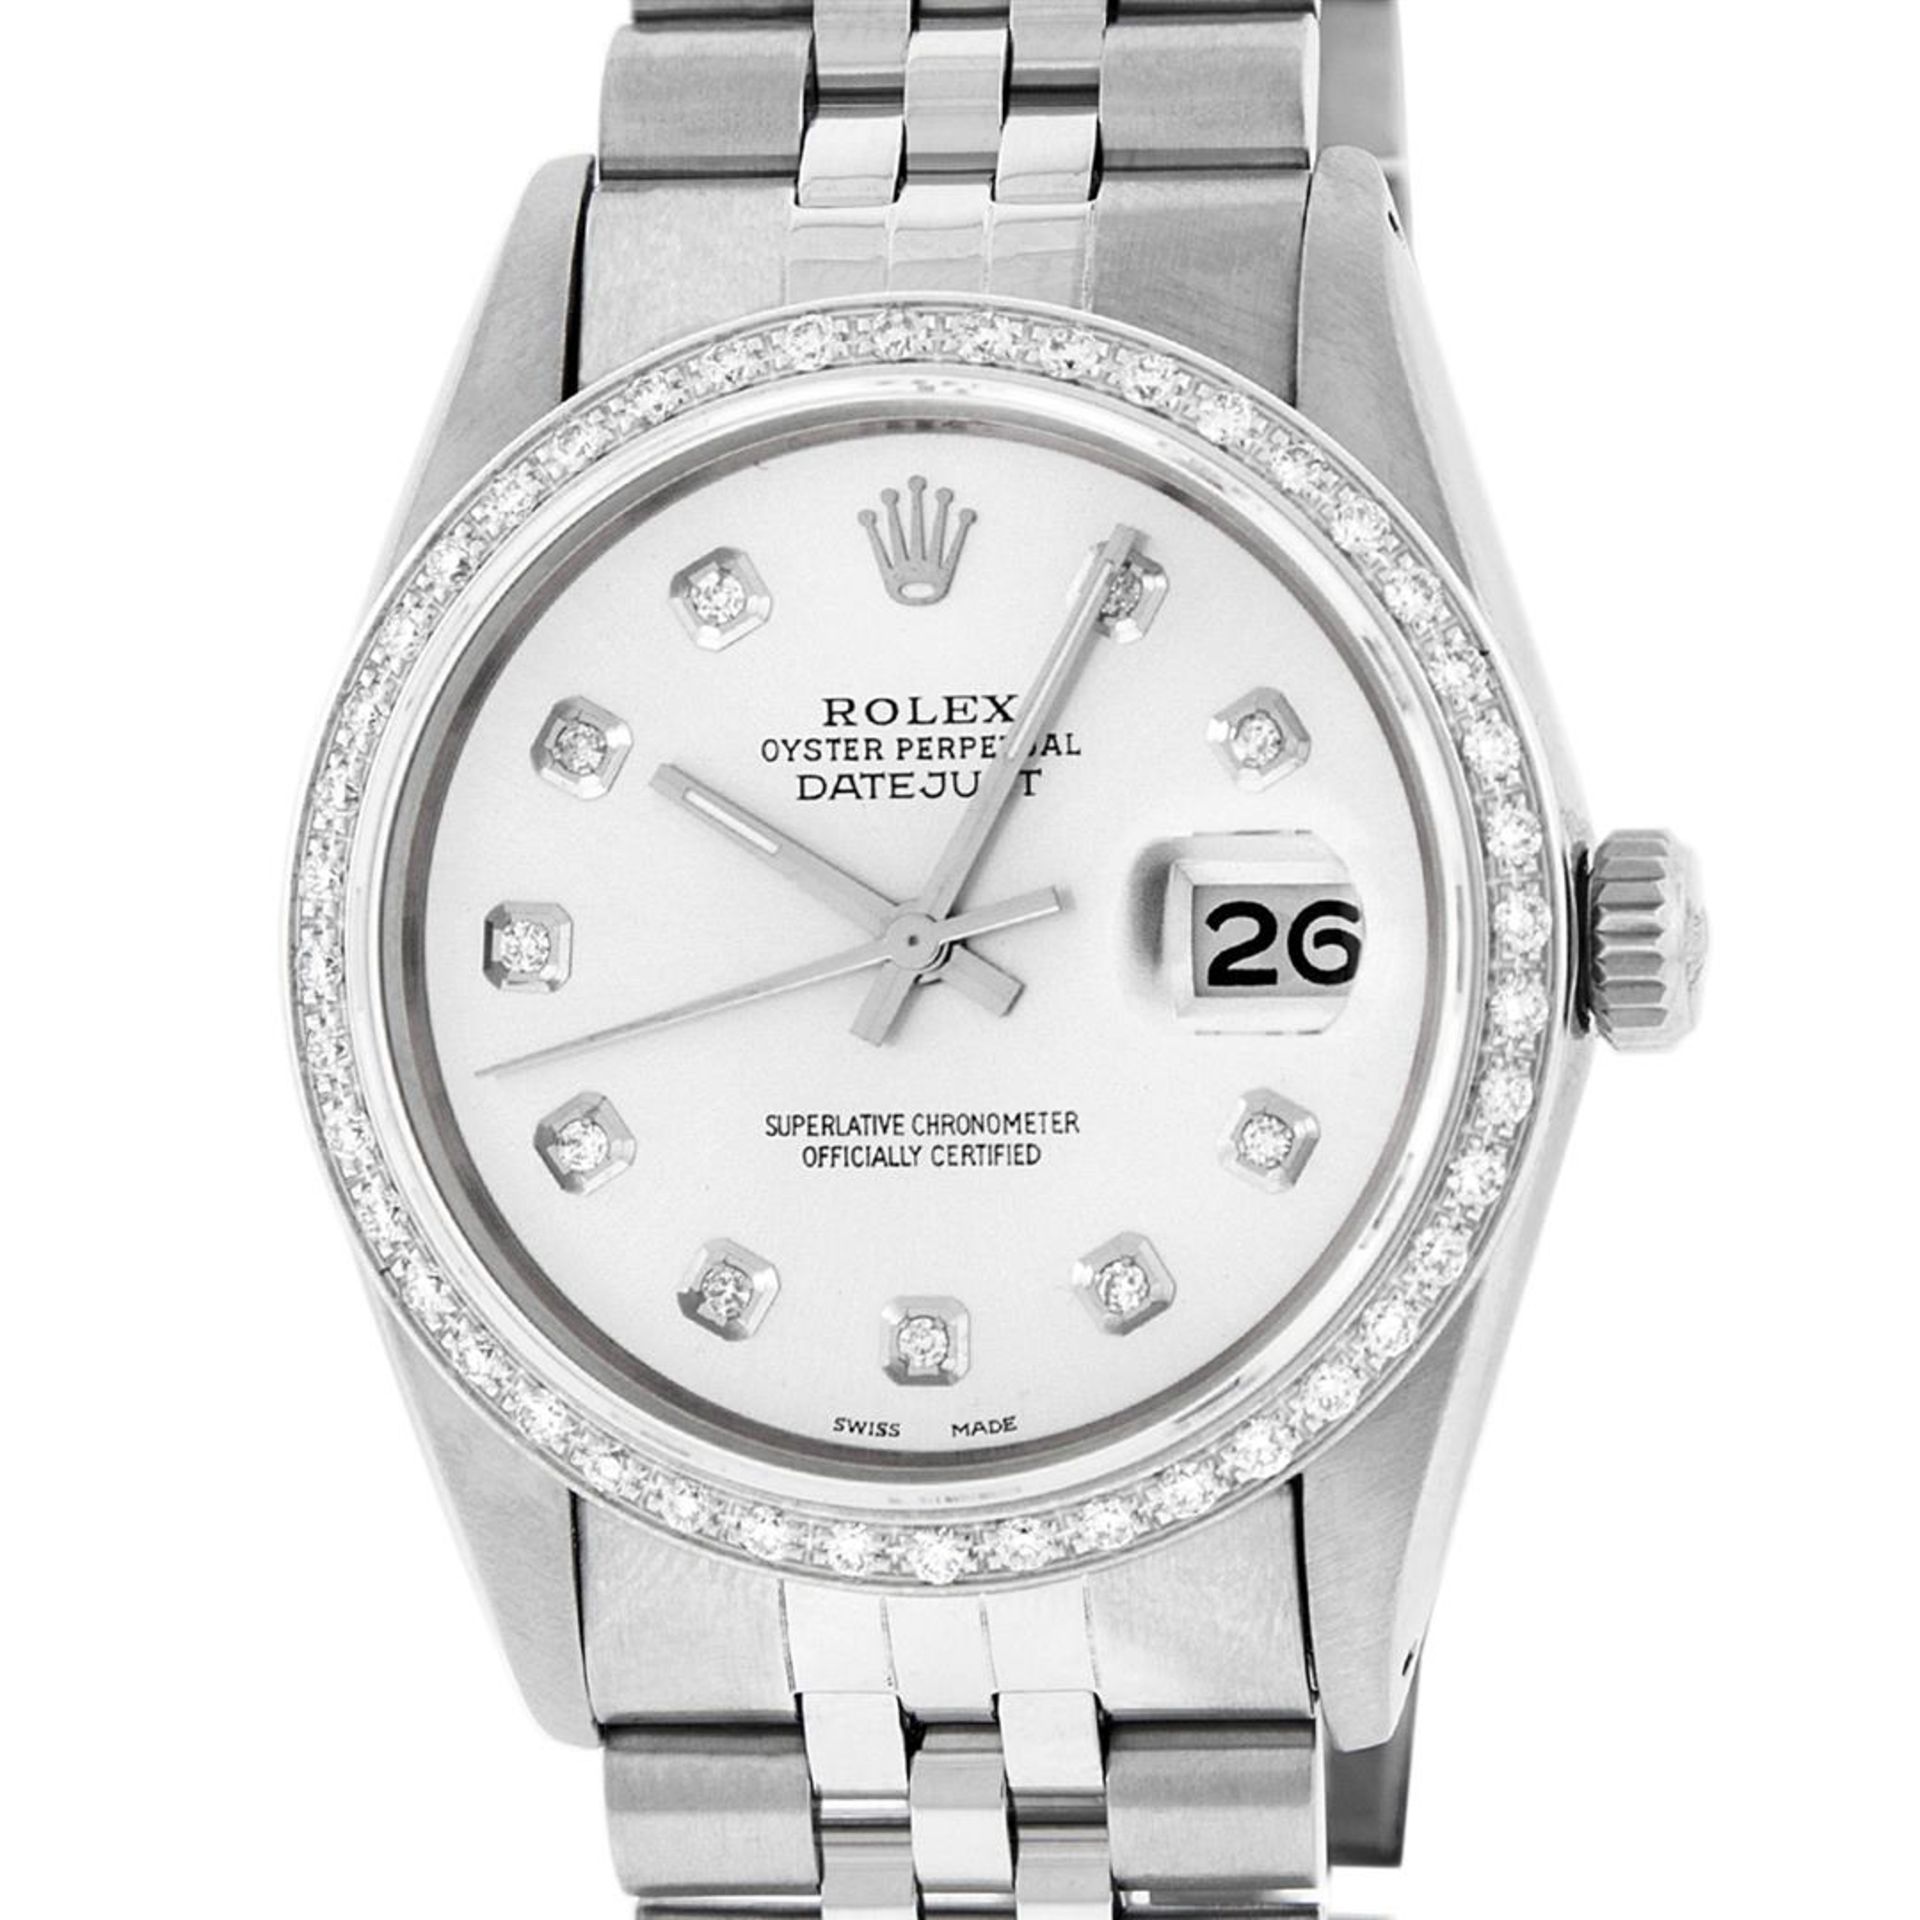 Rolex Mens Datejust 36 Stainless Steel Silver Diamond Oyster Datejust Wristwatch - Image 2 of 9